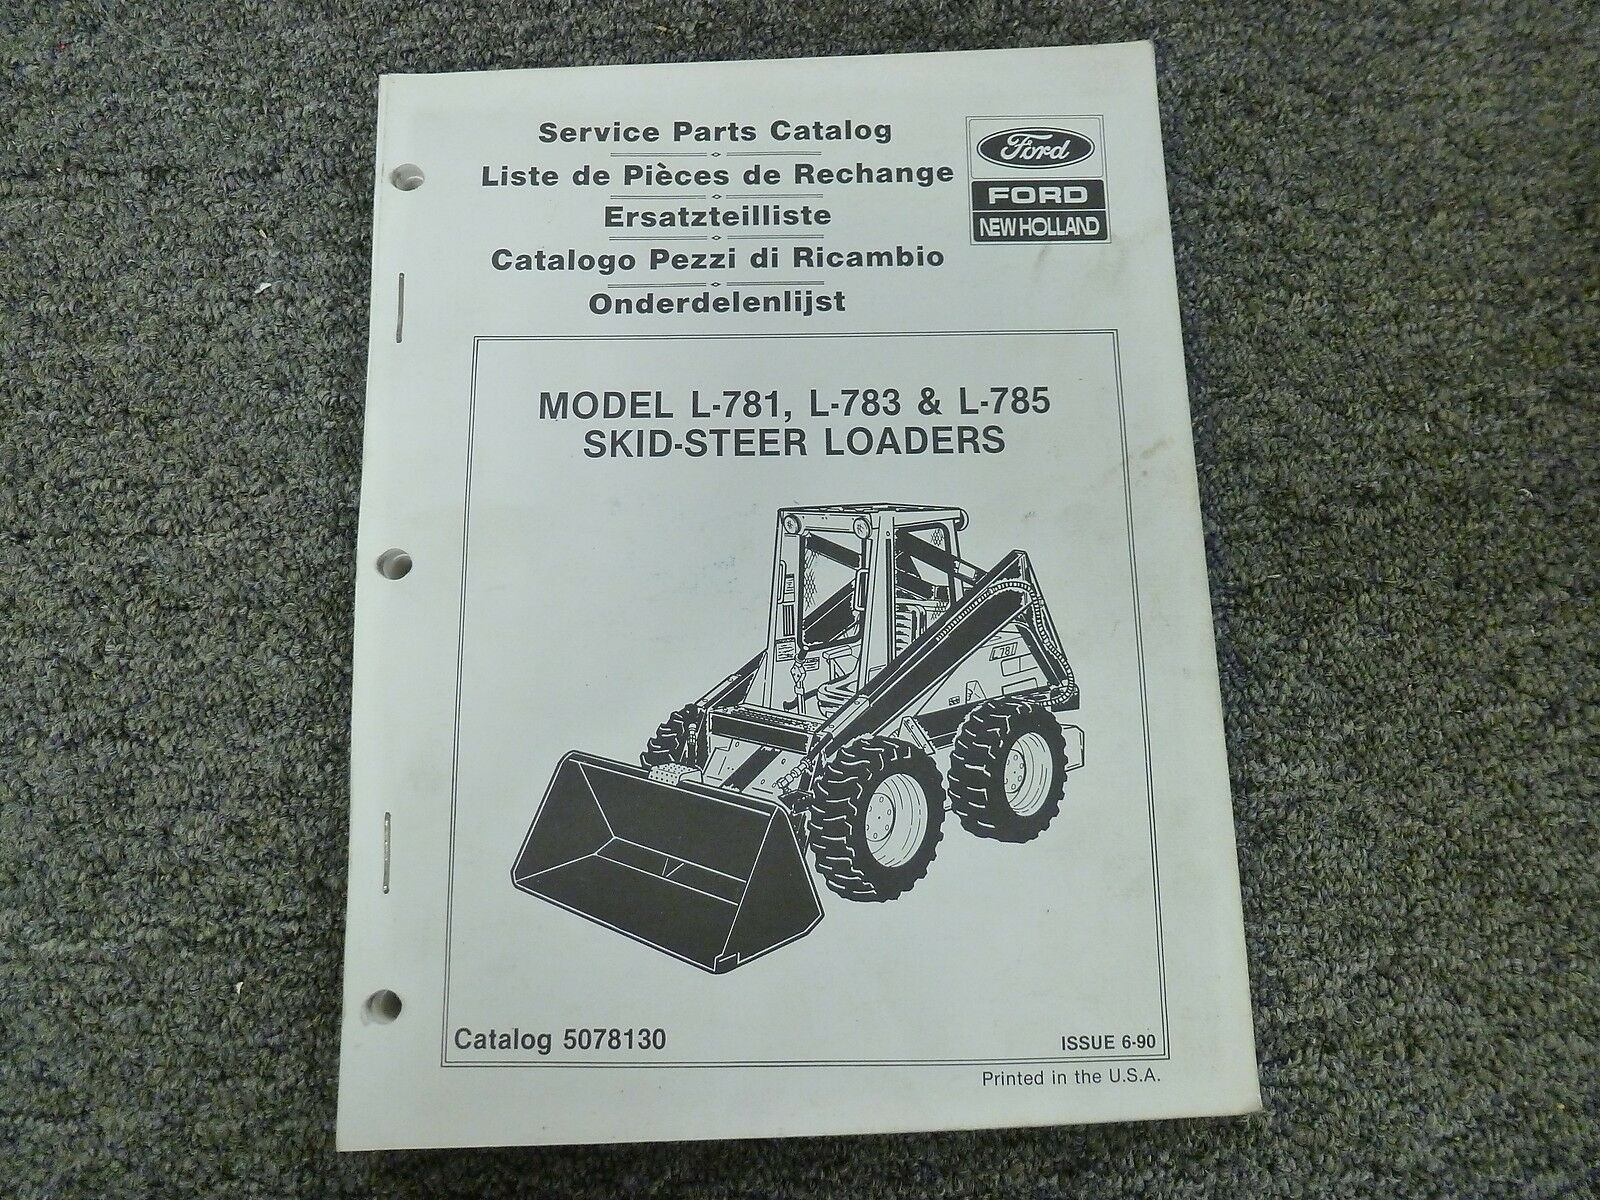 New Holland Skid Steer Parts Diagram Ford New Holland L781 L783 L785 Skid Steer Loader Parts Catalog Manual Book 14895